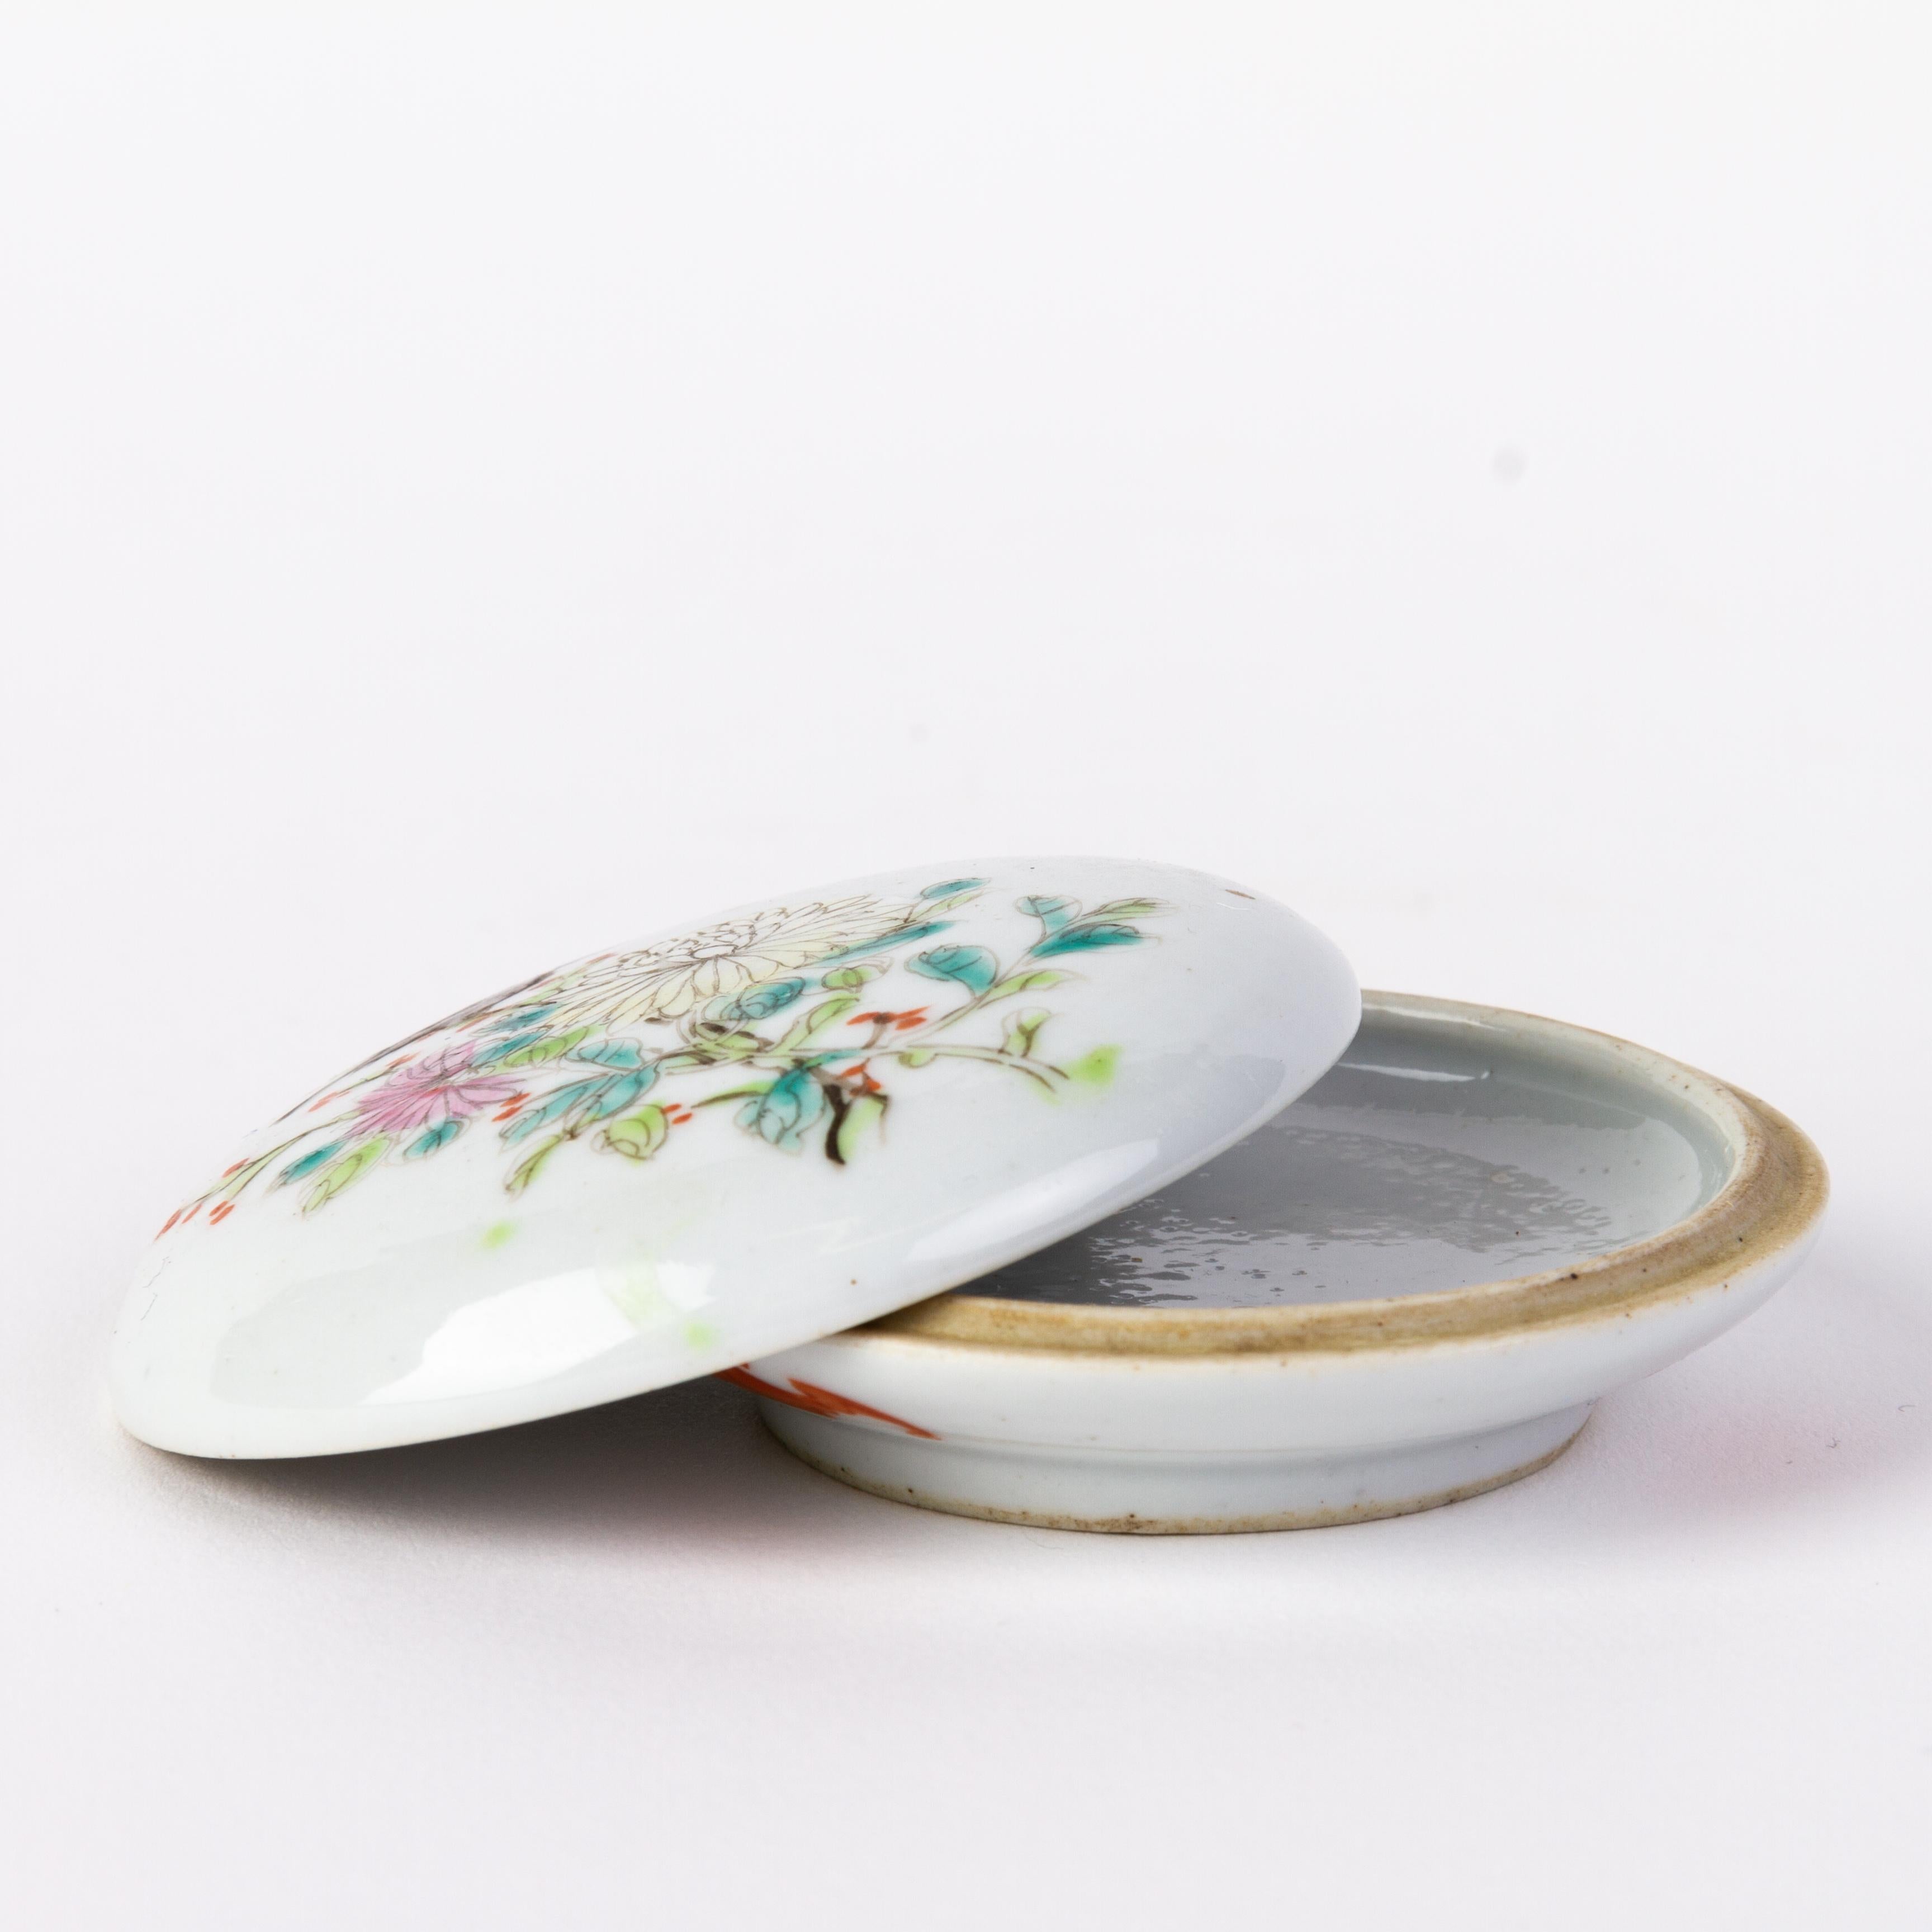 Chinese Guangxu Famille Rose Porcelain Lidded Paste Box 19th Century with Mark For Sale 1